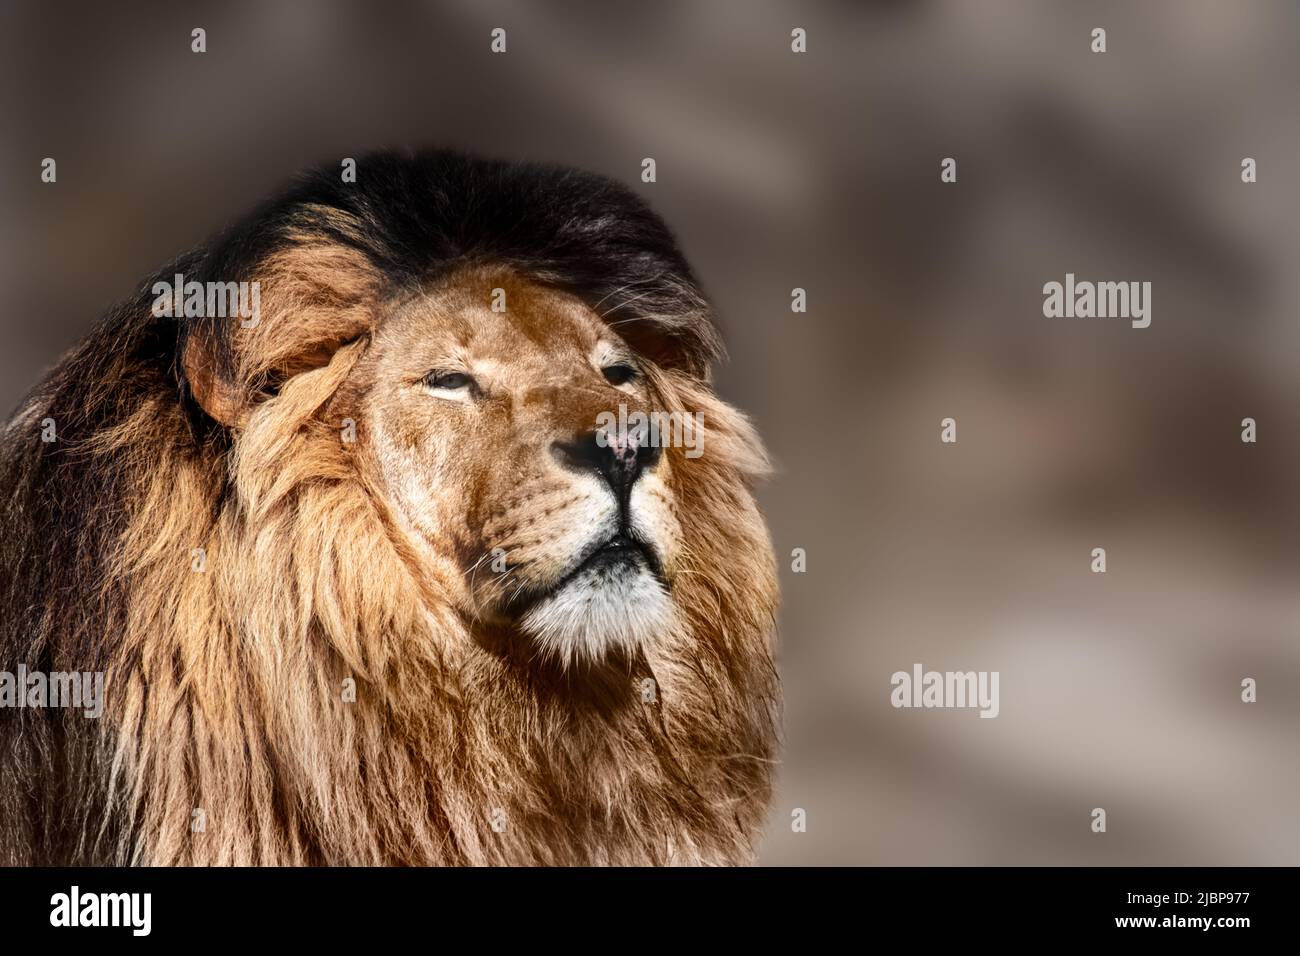 Lion powerful portrait, looking right isolated close-up with blurred background. Wild animals, big carnivore cat Stock Photo